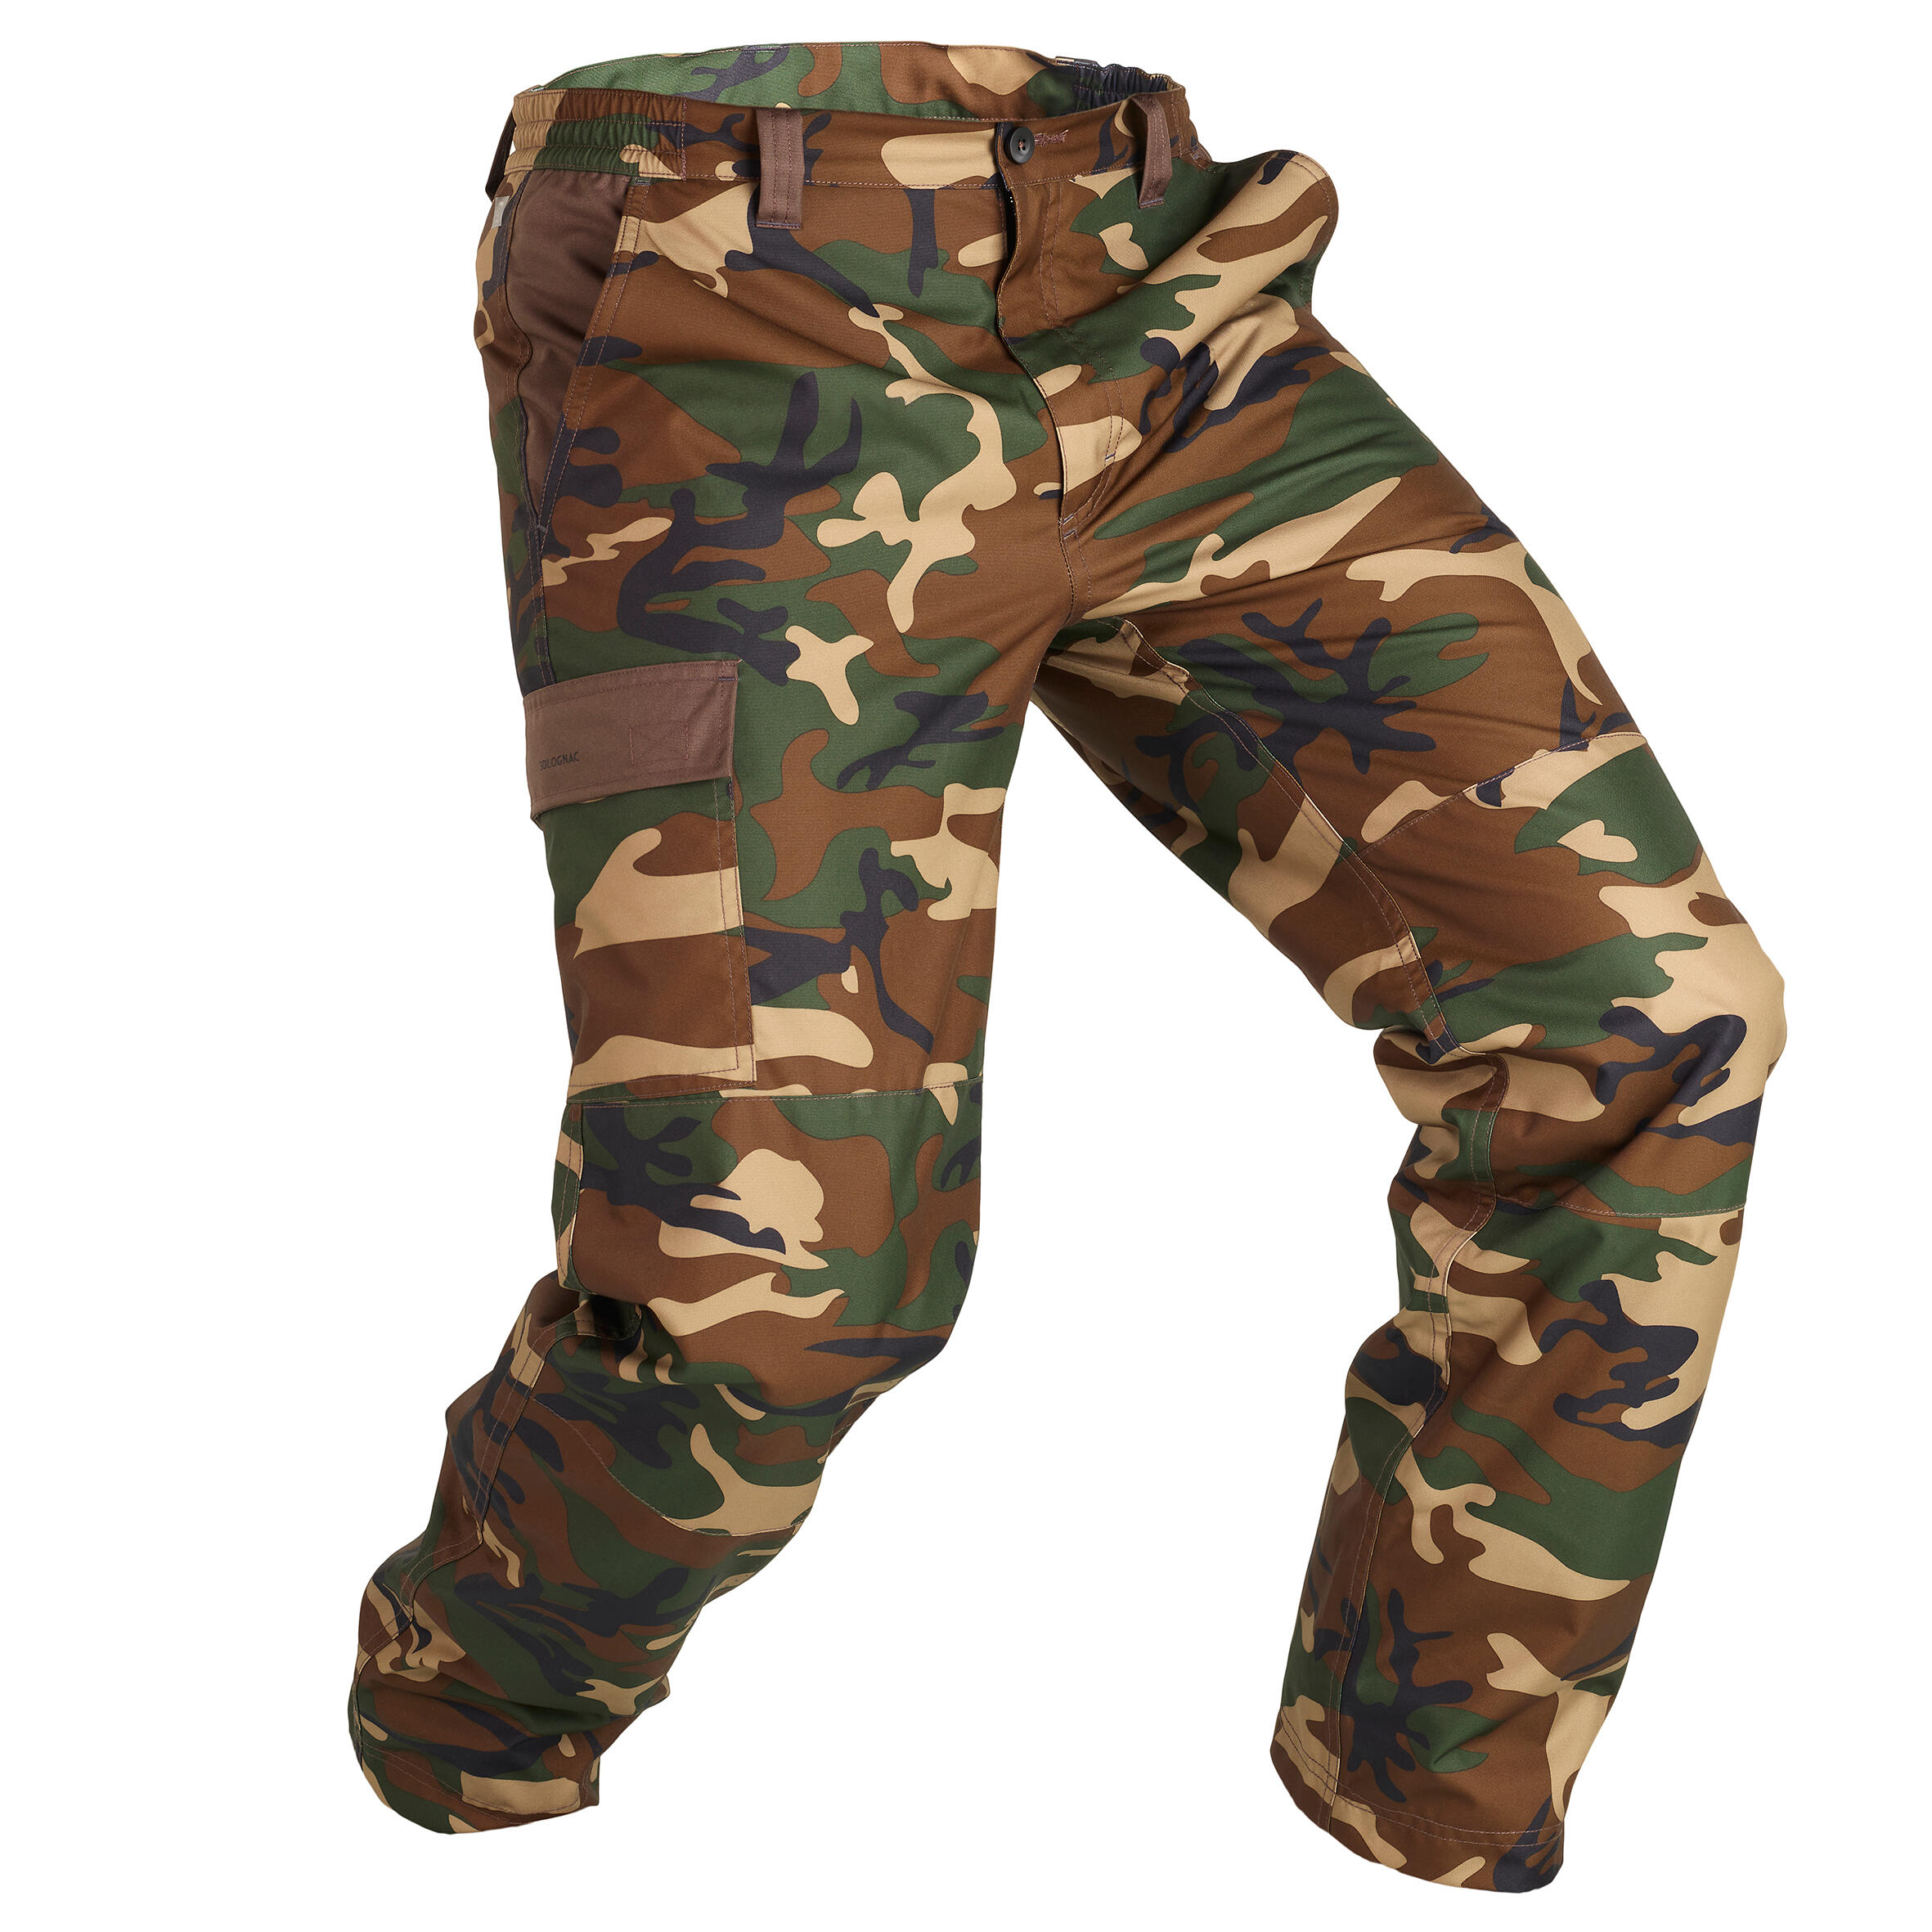 FREE SOLDIER Mens Cargo Pants Lightweight Work Pants for Men Water  Resistant Tactical Pants with Pockets for Hiking Outdoor